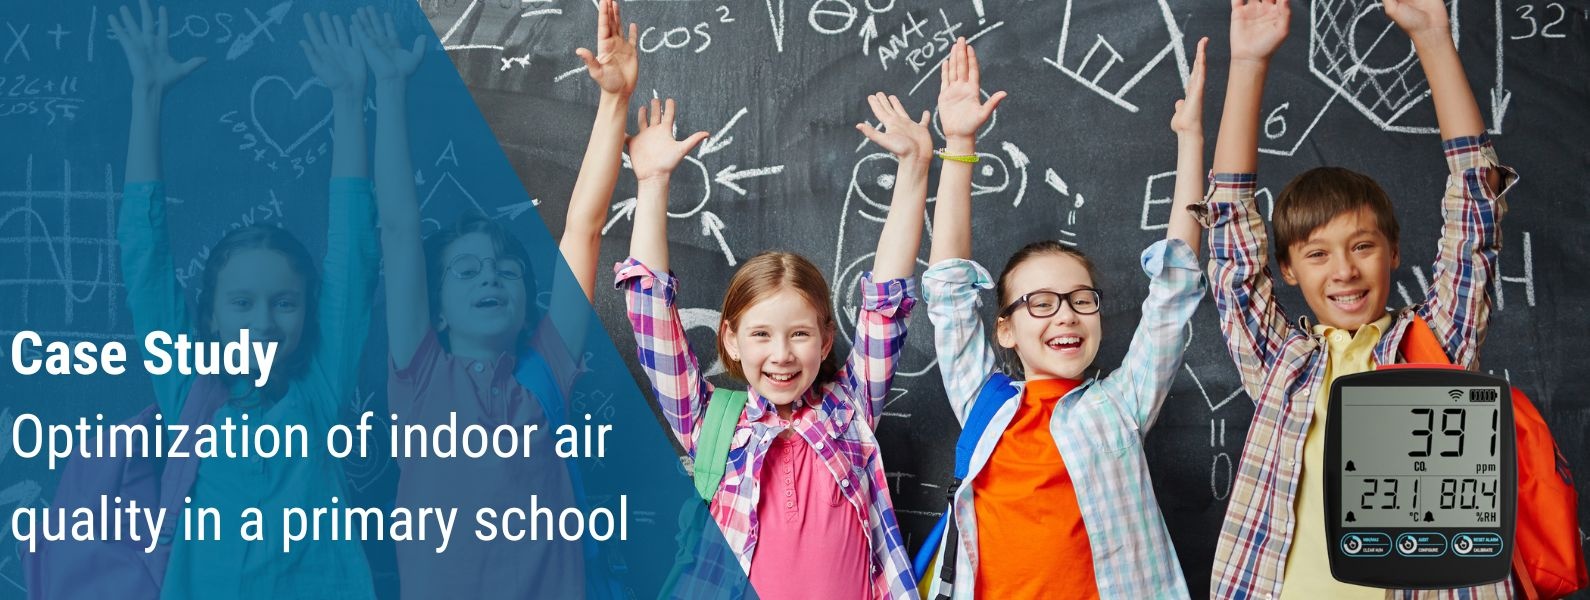 Optimization of Indoor Air Quality in a primary school